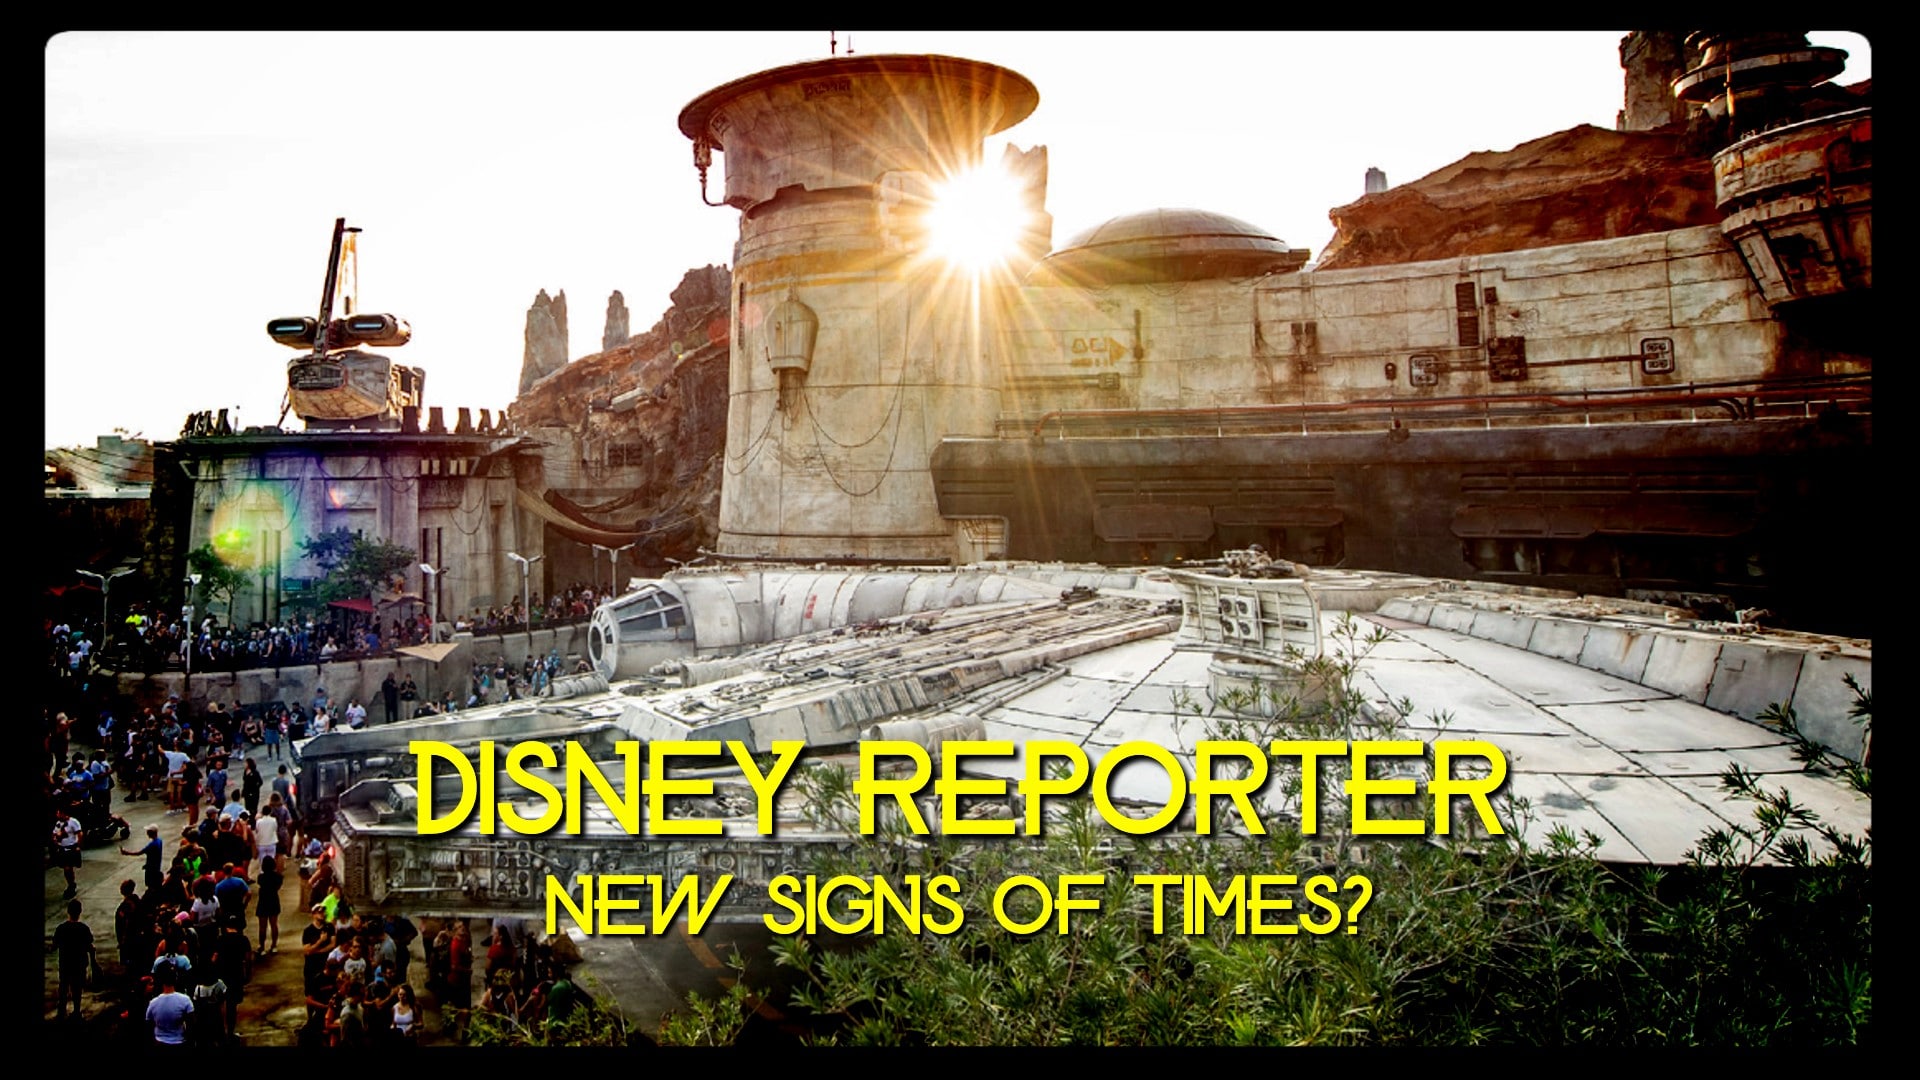 New Signs of Times? - DISNEY Reporter